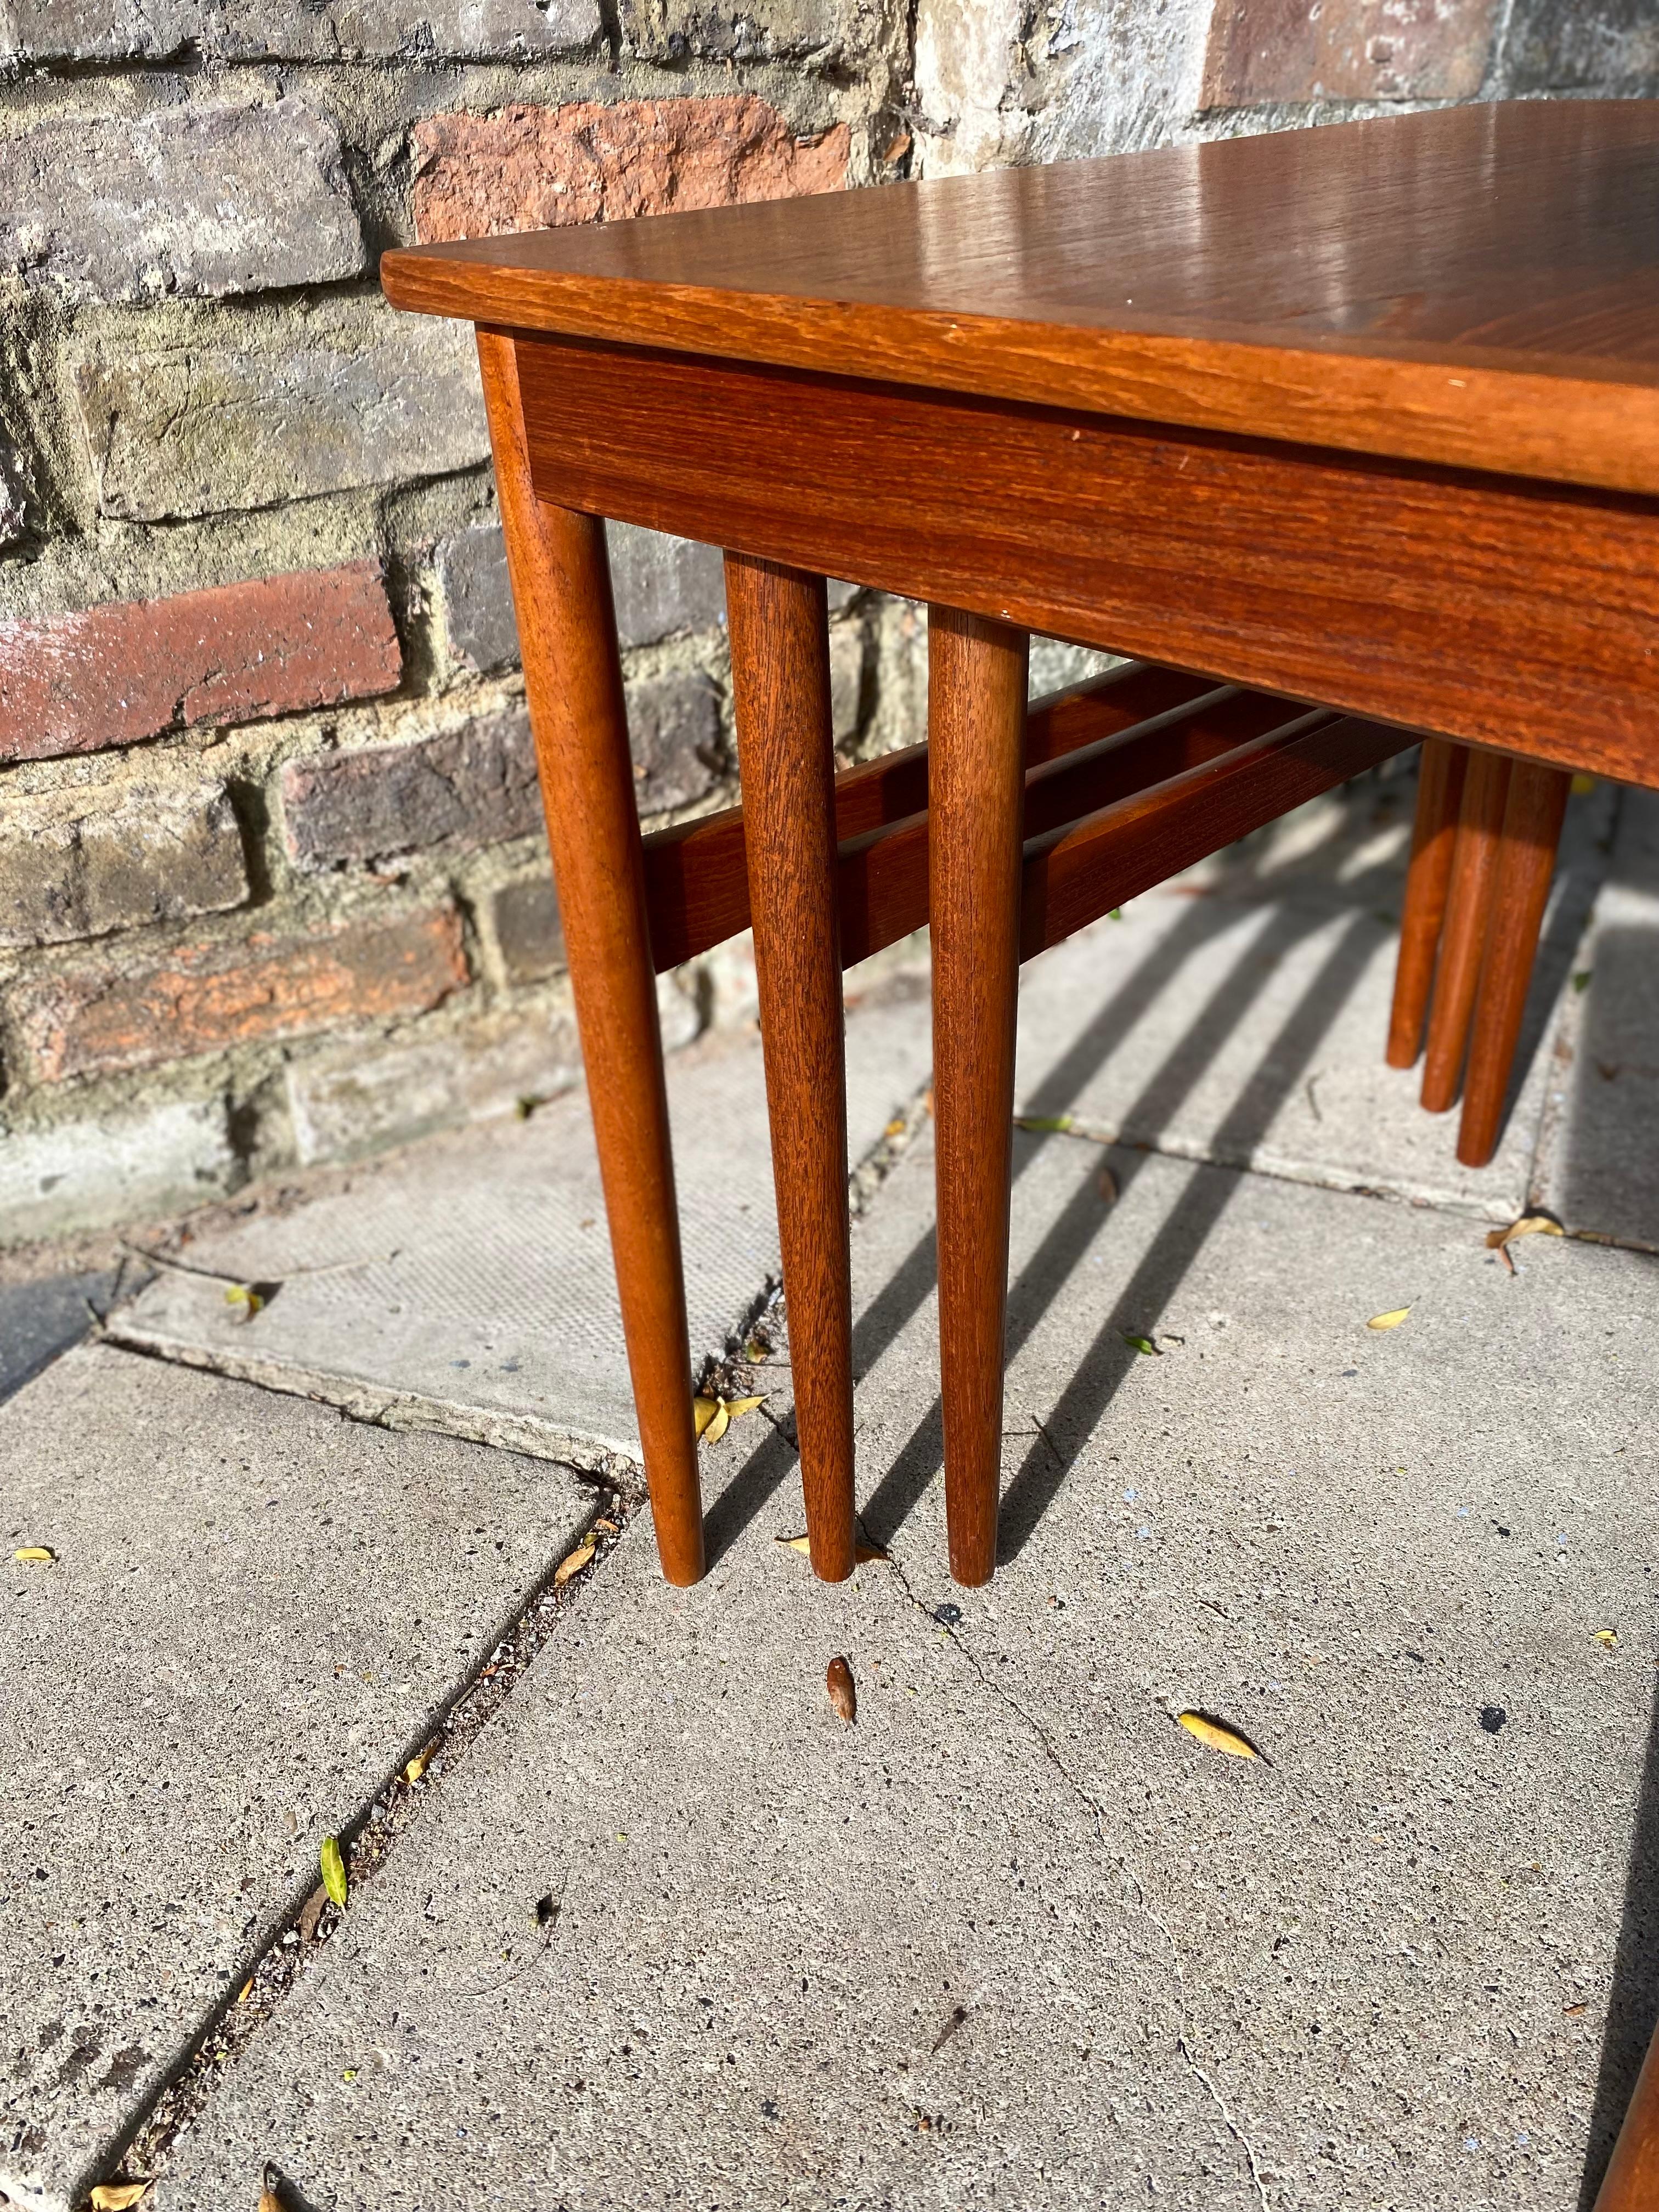 Mid-Century Teak Nest of Tables By Peter Brink for BR Gelsted, Denmark, C. 1960s For Sale 9